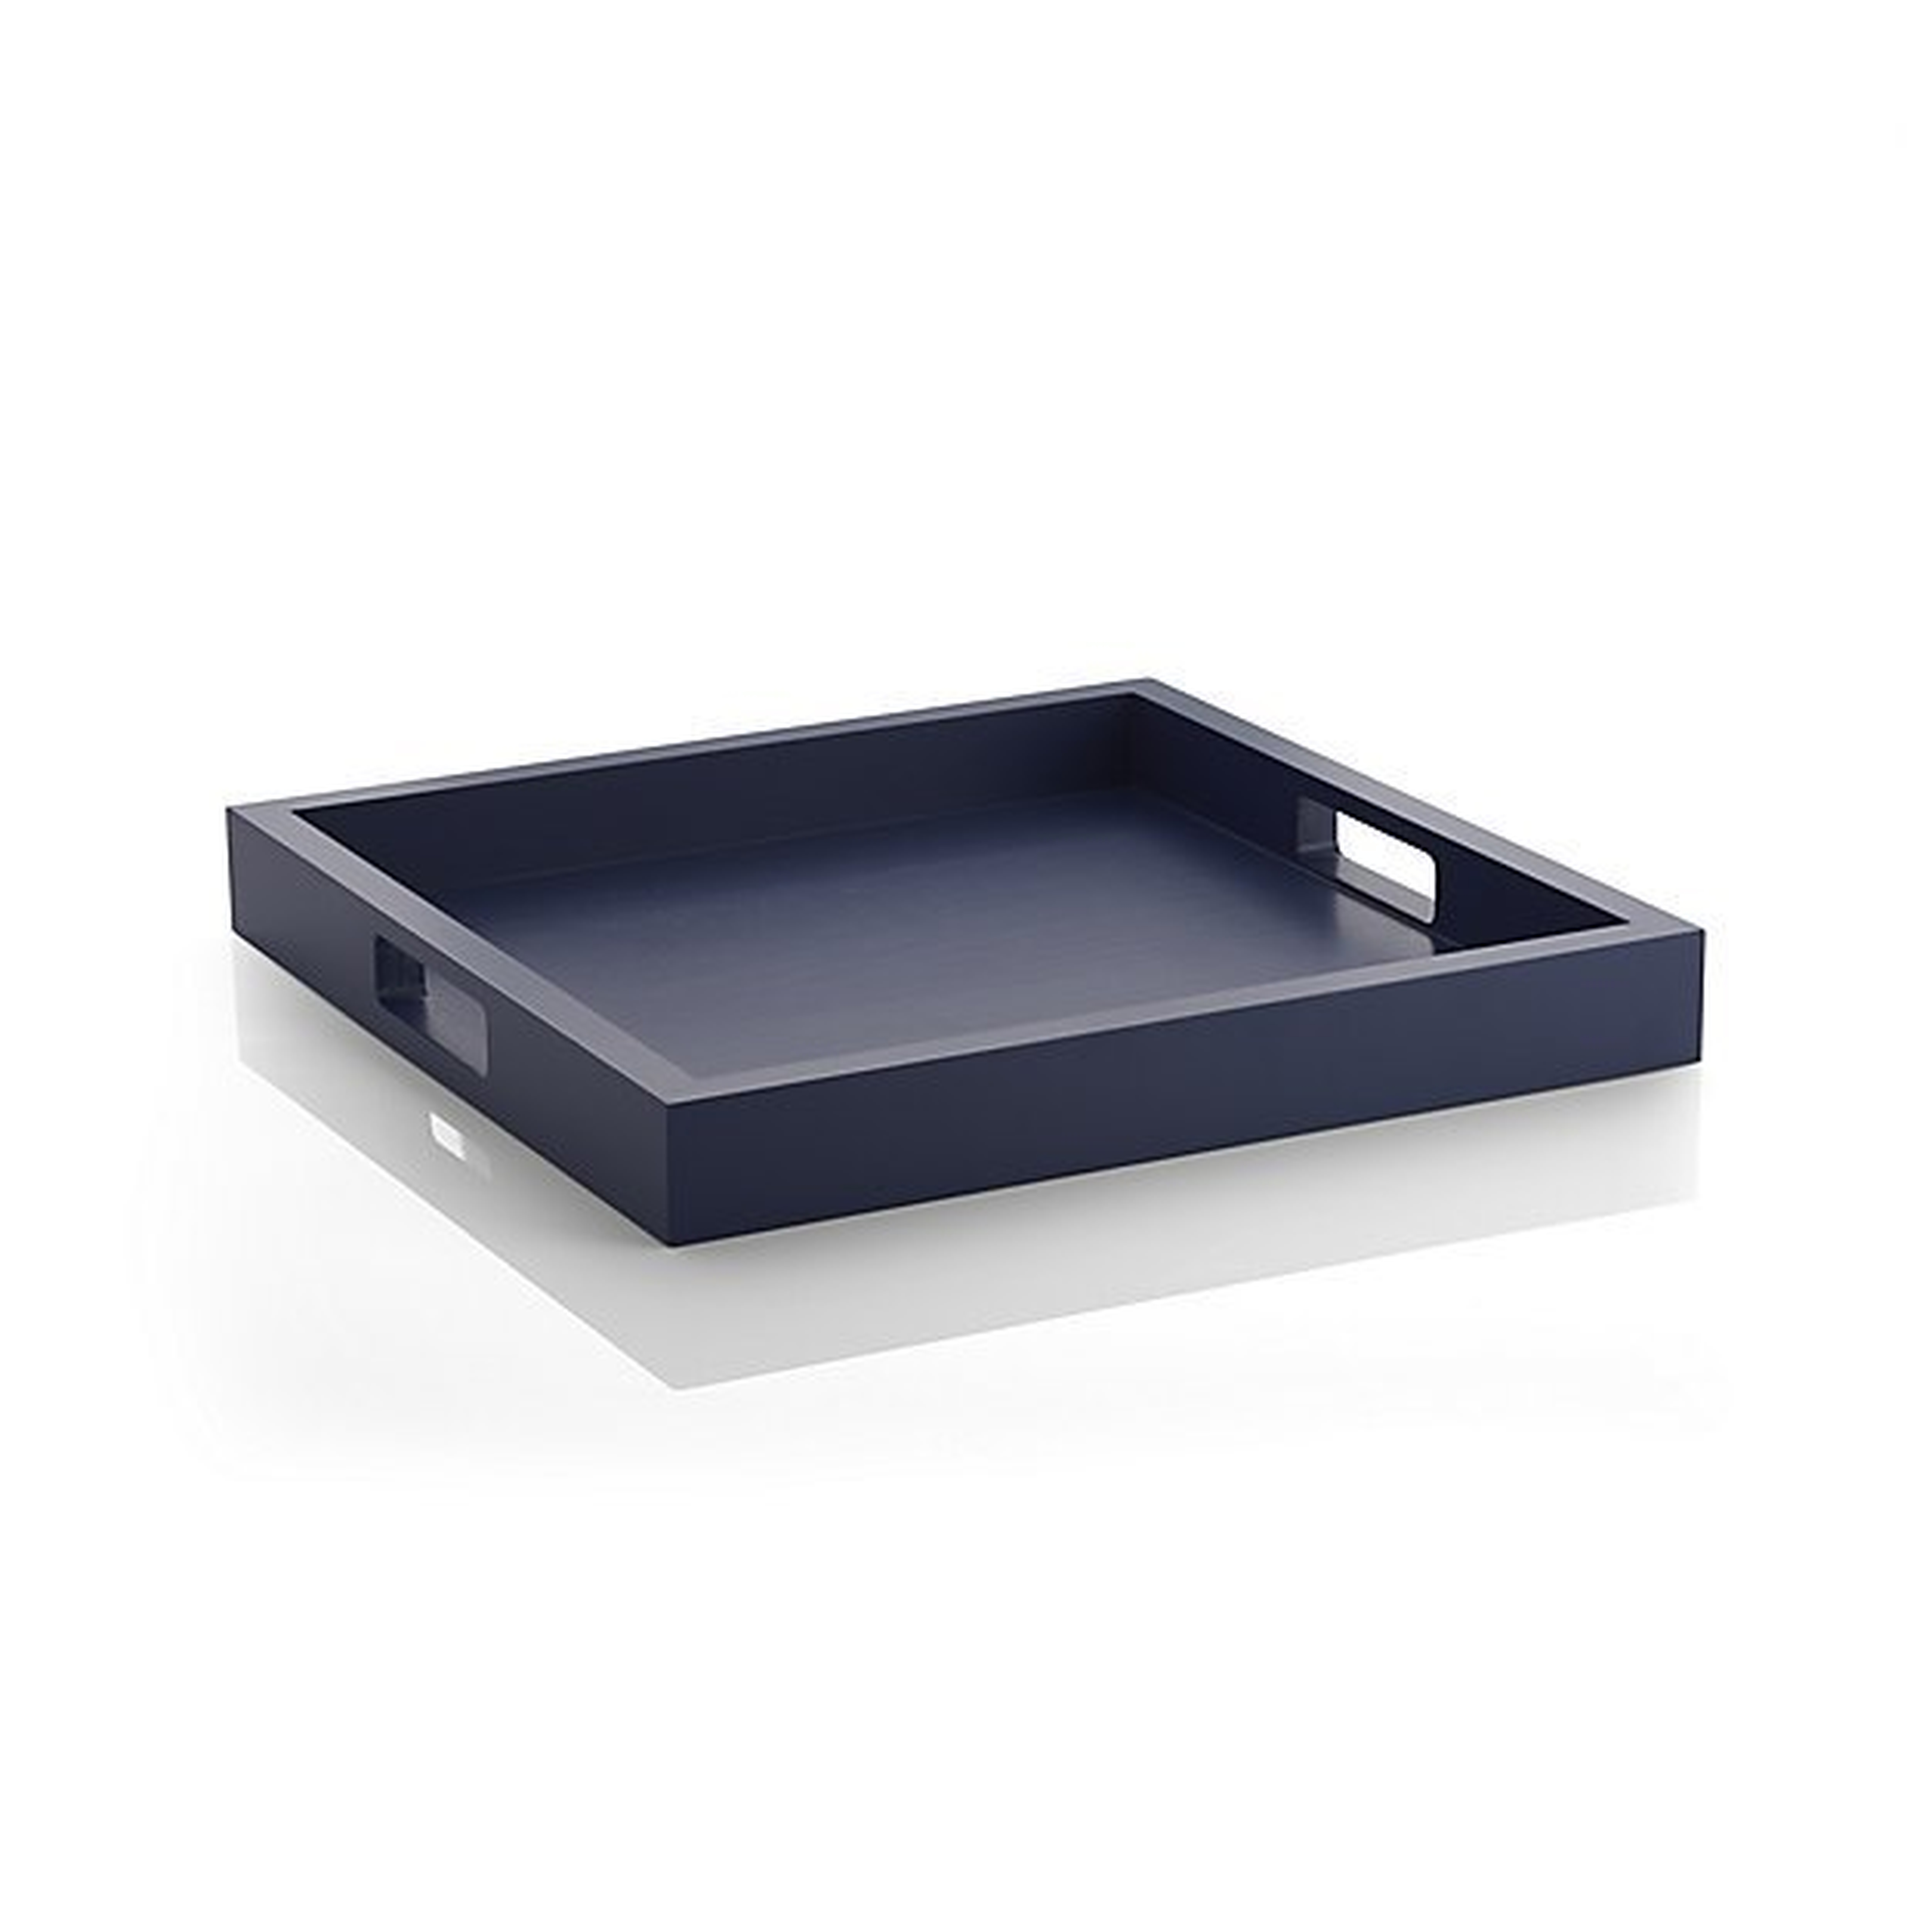 Zuma Square Limoges Blue Tray - Crate and Barrel